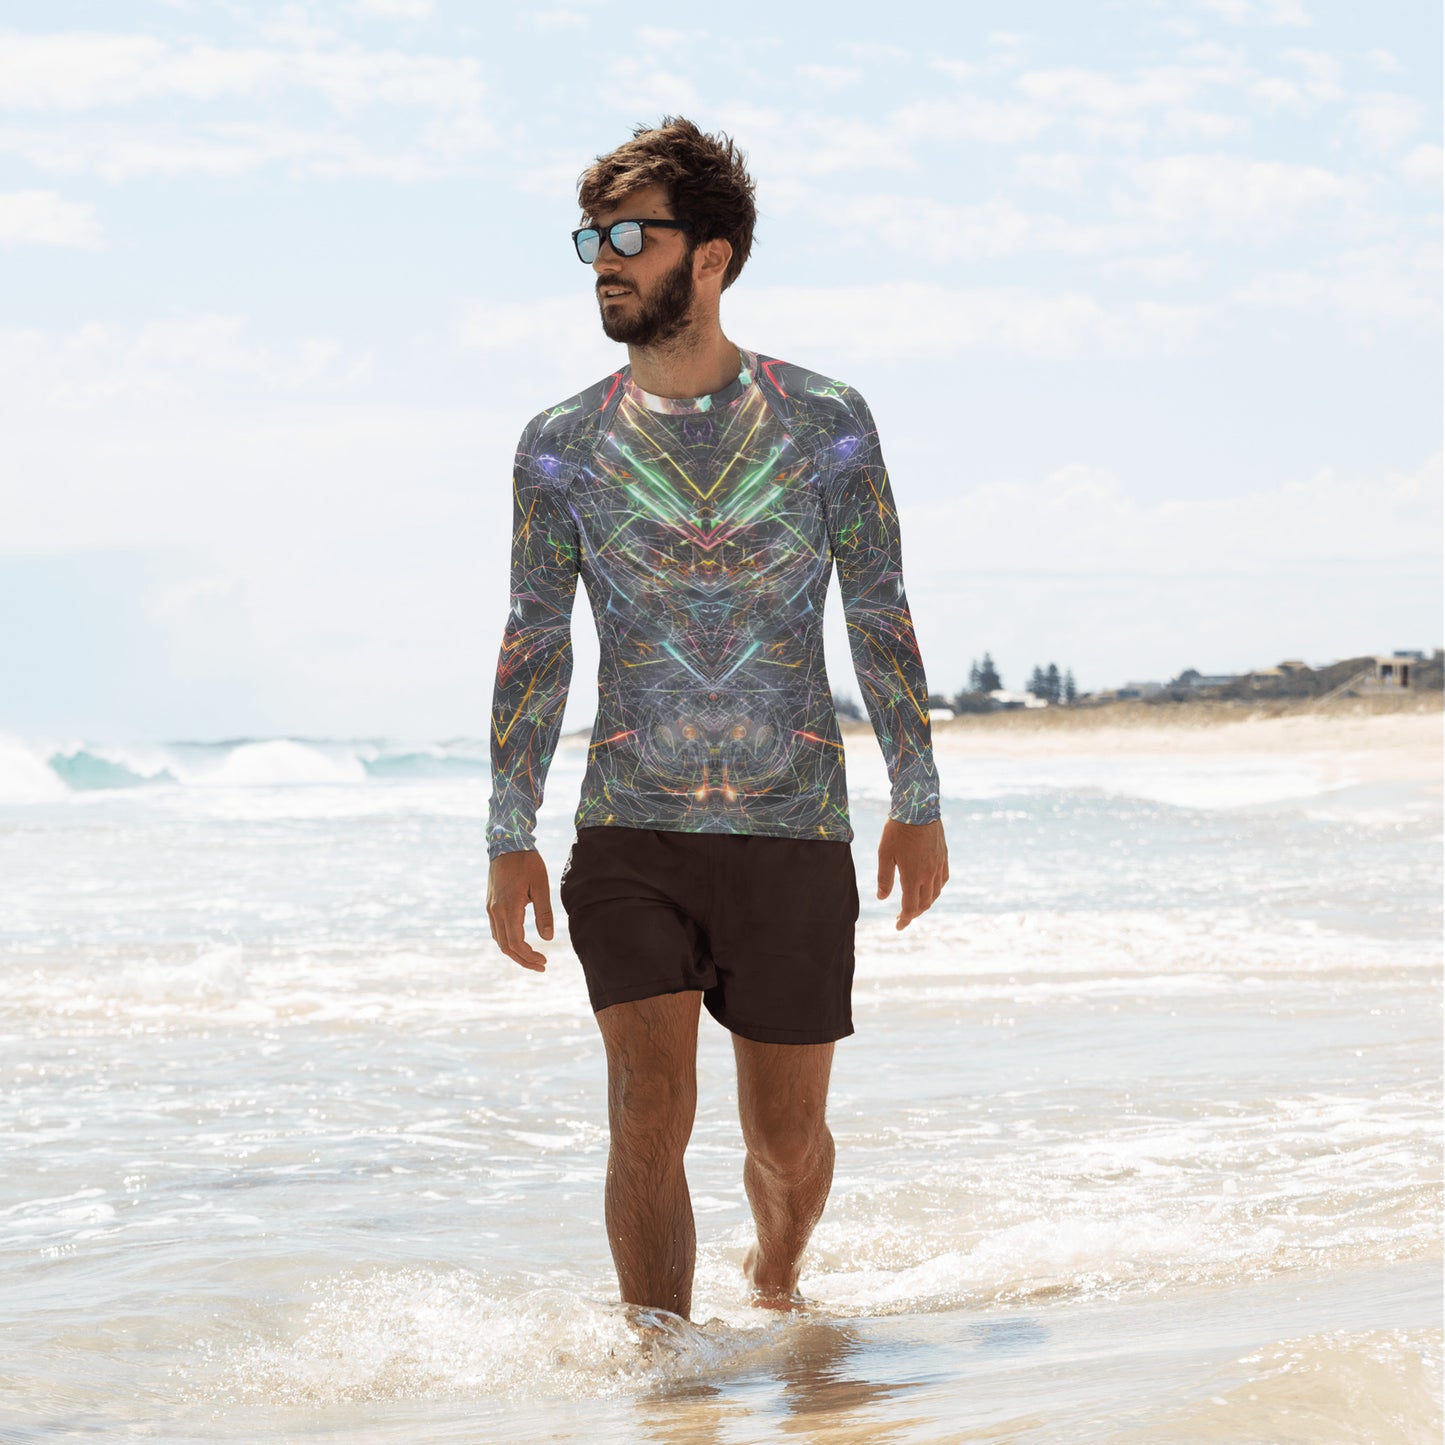 Totally Wired : Men's Rash Guard